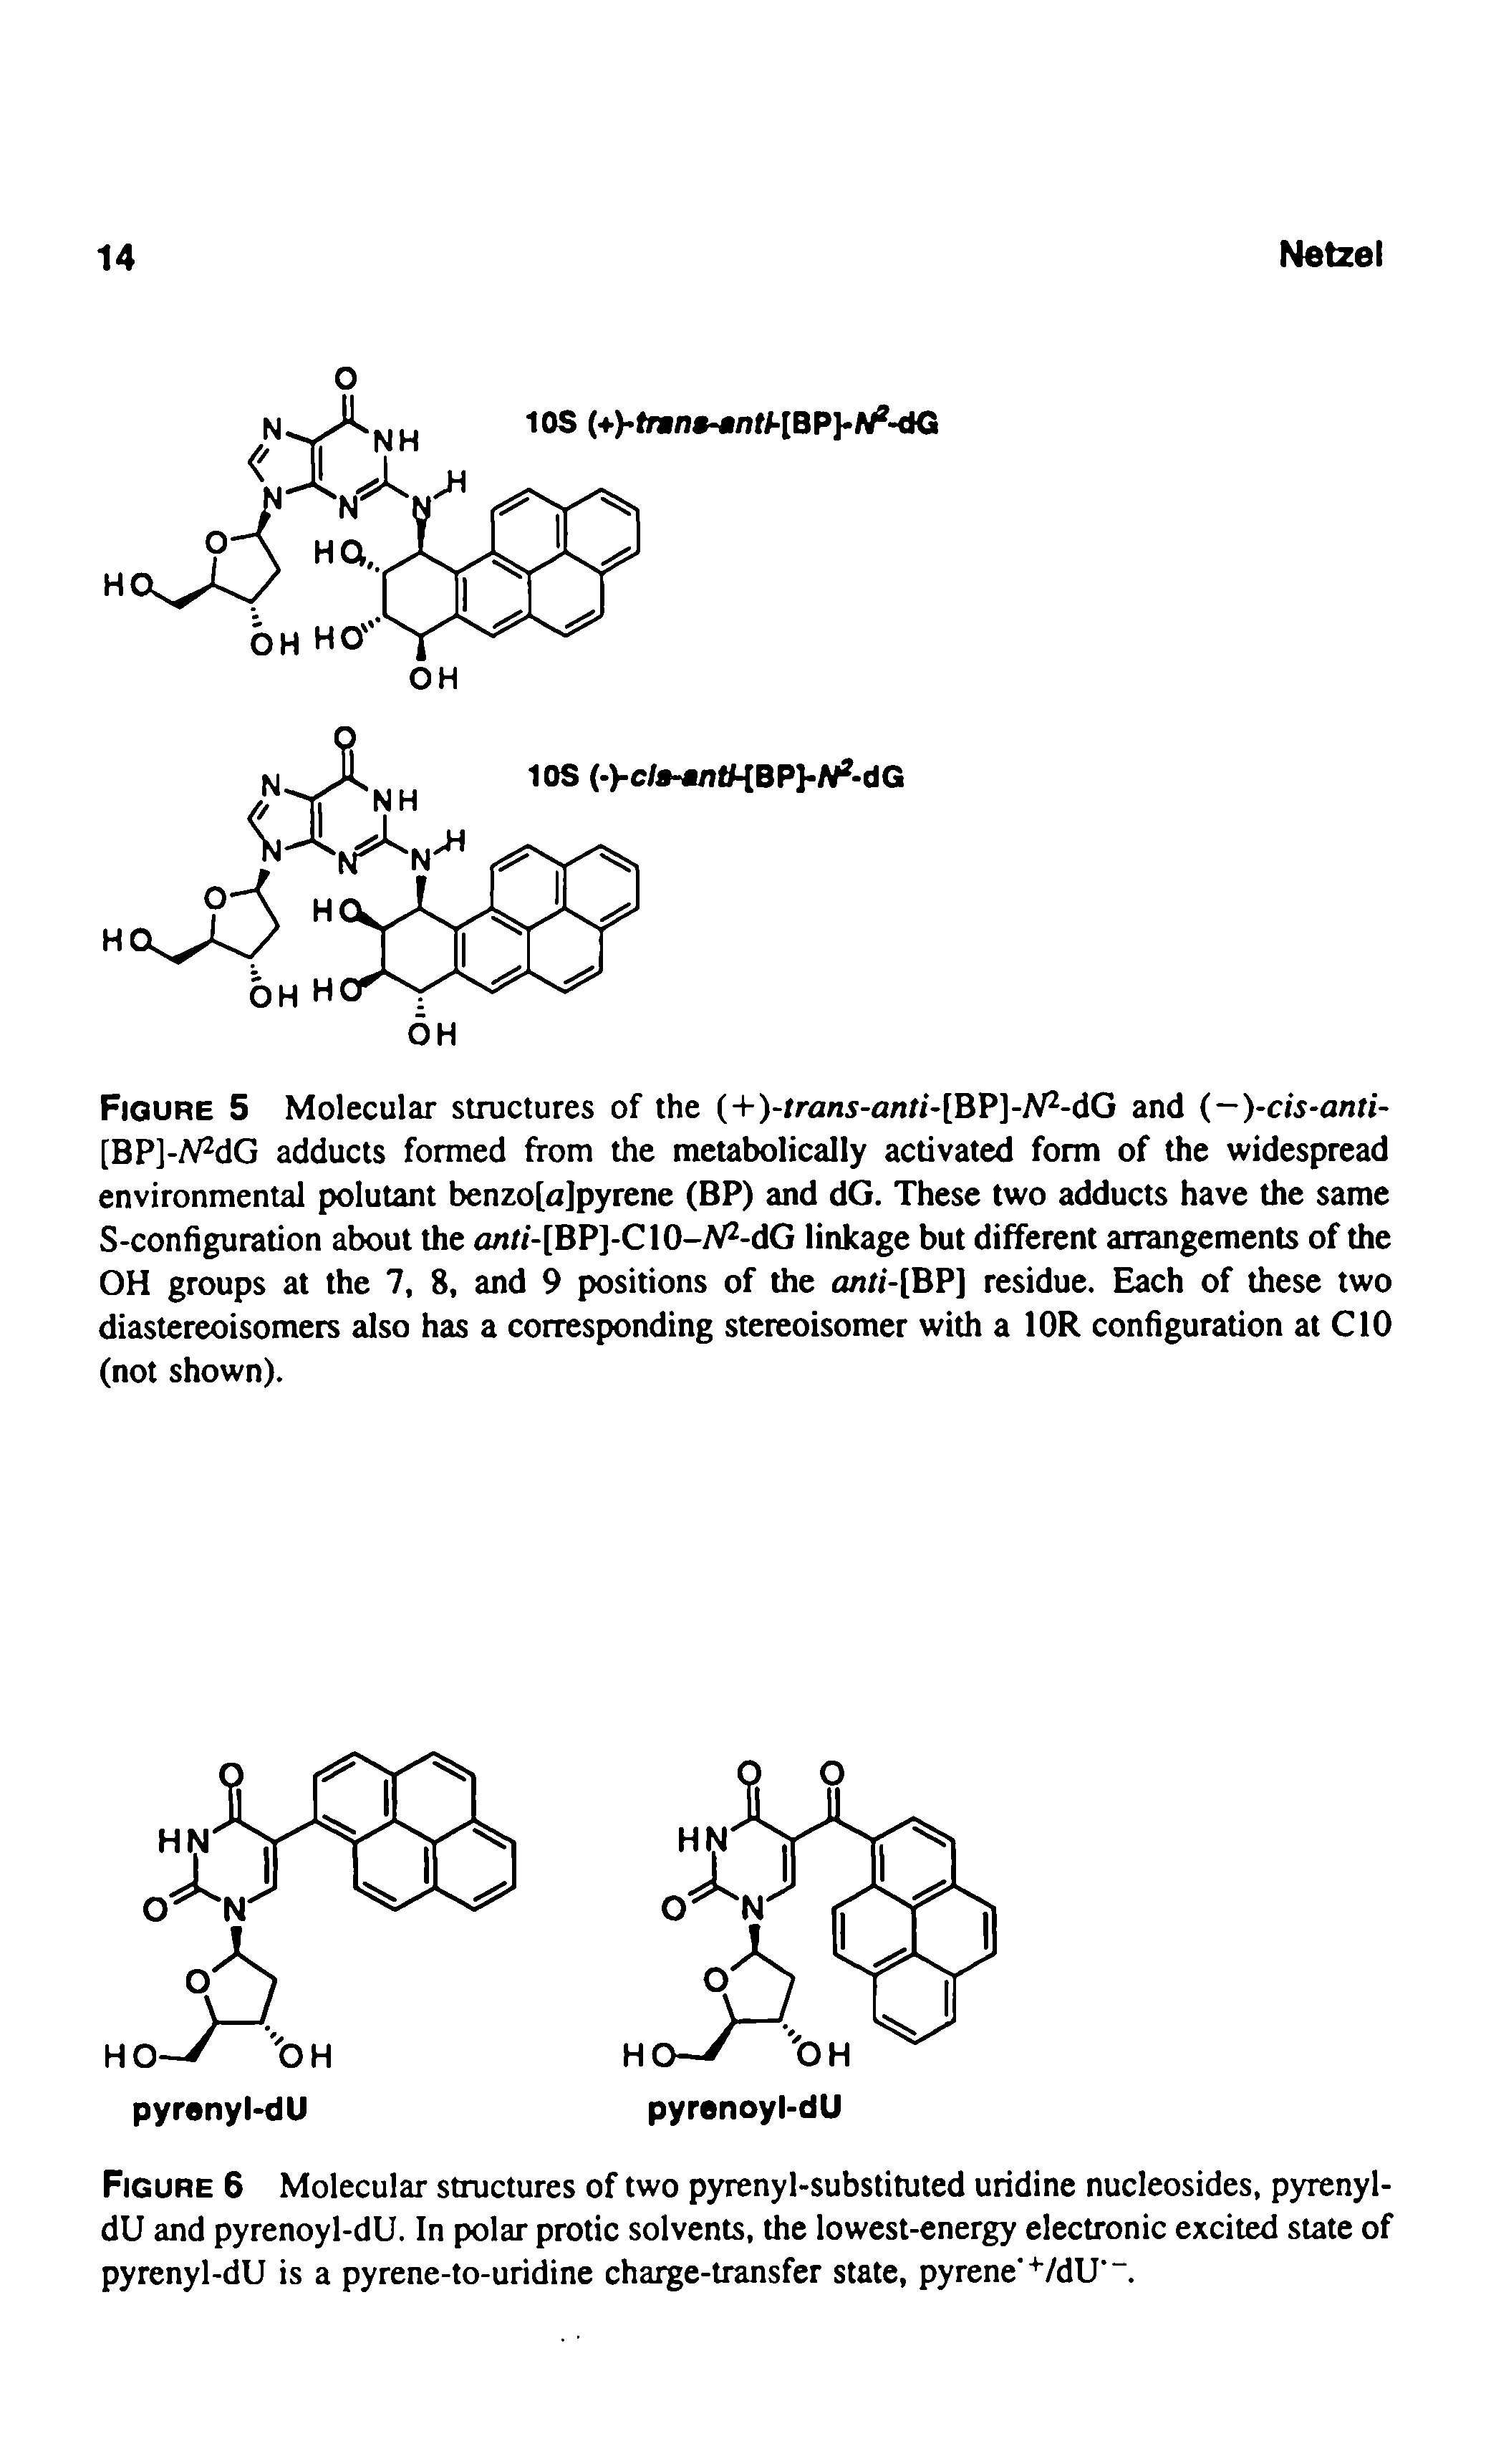 Figure 6 Molecular structures of two pyrenyl-substituted uridine nucleosides, pyrenyl-dU and pyrenoyl-dU. In polar protic solvents, the lowest-energy electronic excited state of pyrenyl-dU is a pyrene-to-uridine charge-transfer state, pyrene +/dU .